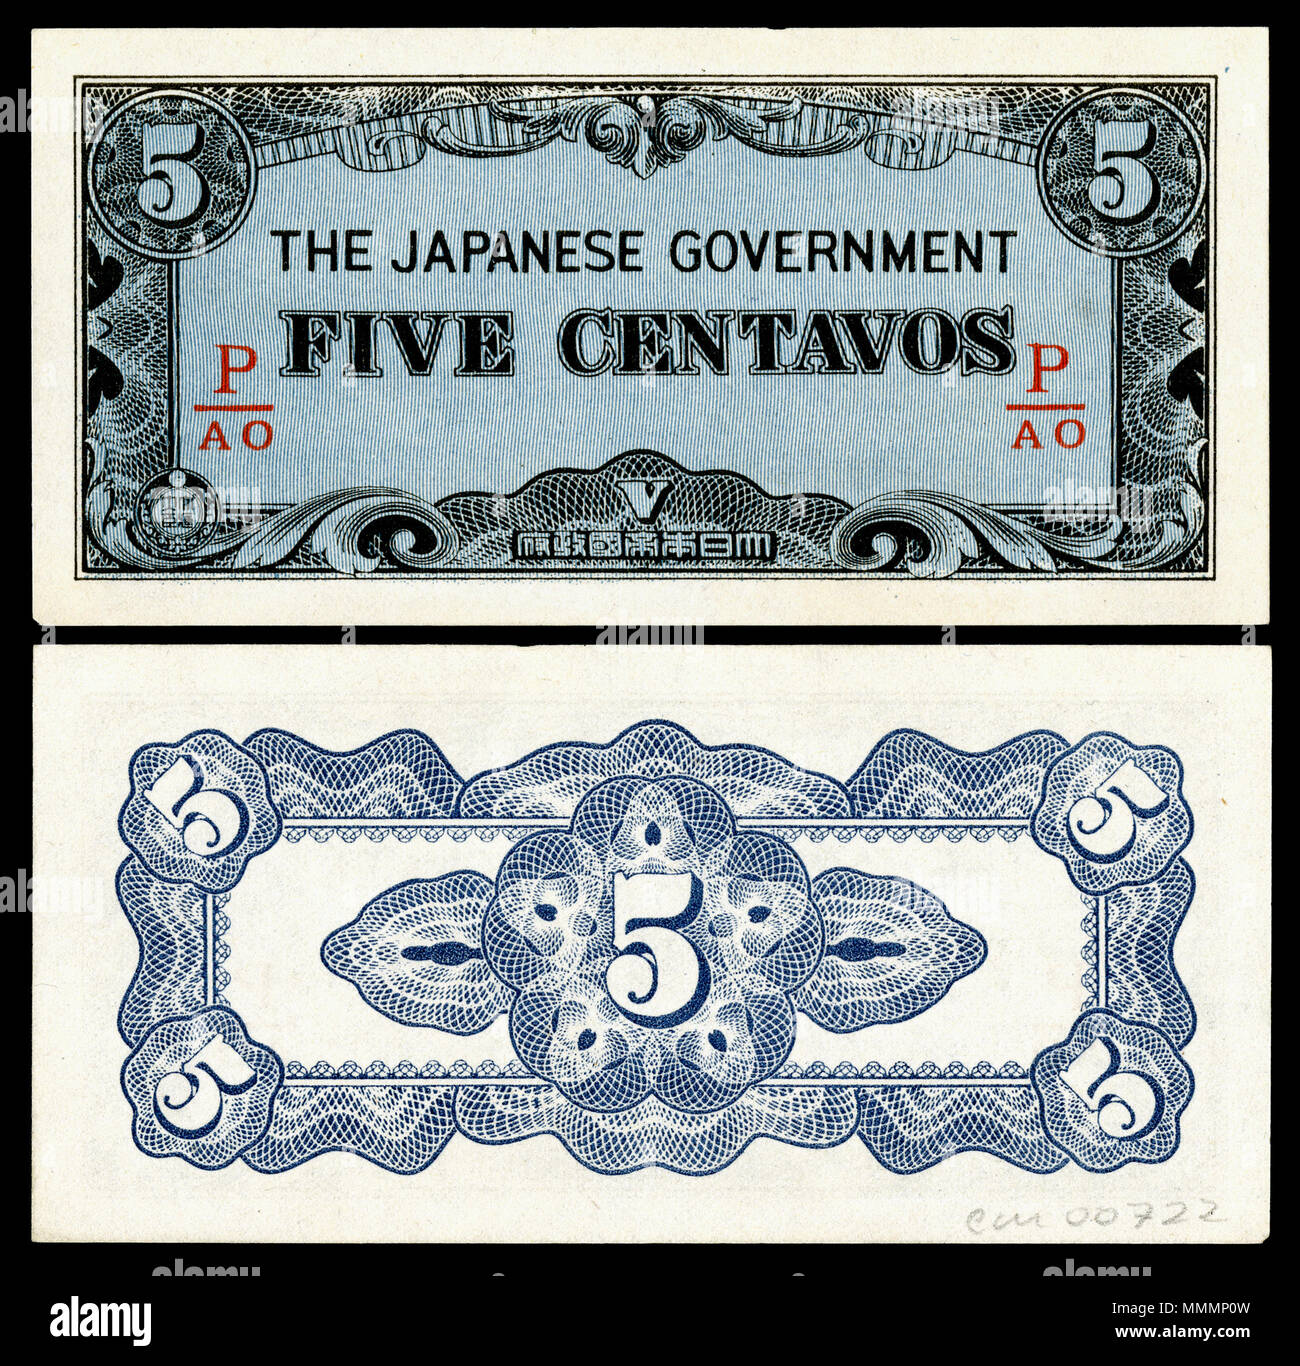 . English: PHI-103b-Japanese Government (Philippines)-5 Centavos (1942) The Japanese government-issued Philippine peso, part of the Japanese invasion money of World War II, was issued between 1942 and 1945 by the occupying Japanese government.  . 19 August 2014, 14:52:10. Empire of Japan  National Museum of American History -�   Native name National Museum of American History  Parent institution Smithsonian Affiliations  Location Washington, D.C., United States of America  Coordinates 38-�-���-�.68��-� 77-�-���-���-�  Established 1964  Web page americanhistory.si.edu  Authority control  : Q148 Stock Photo